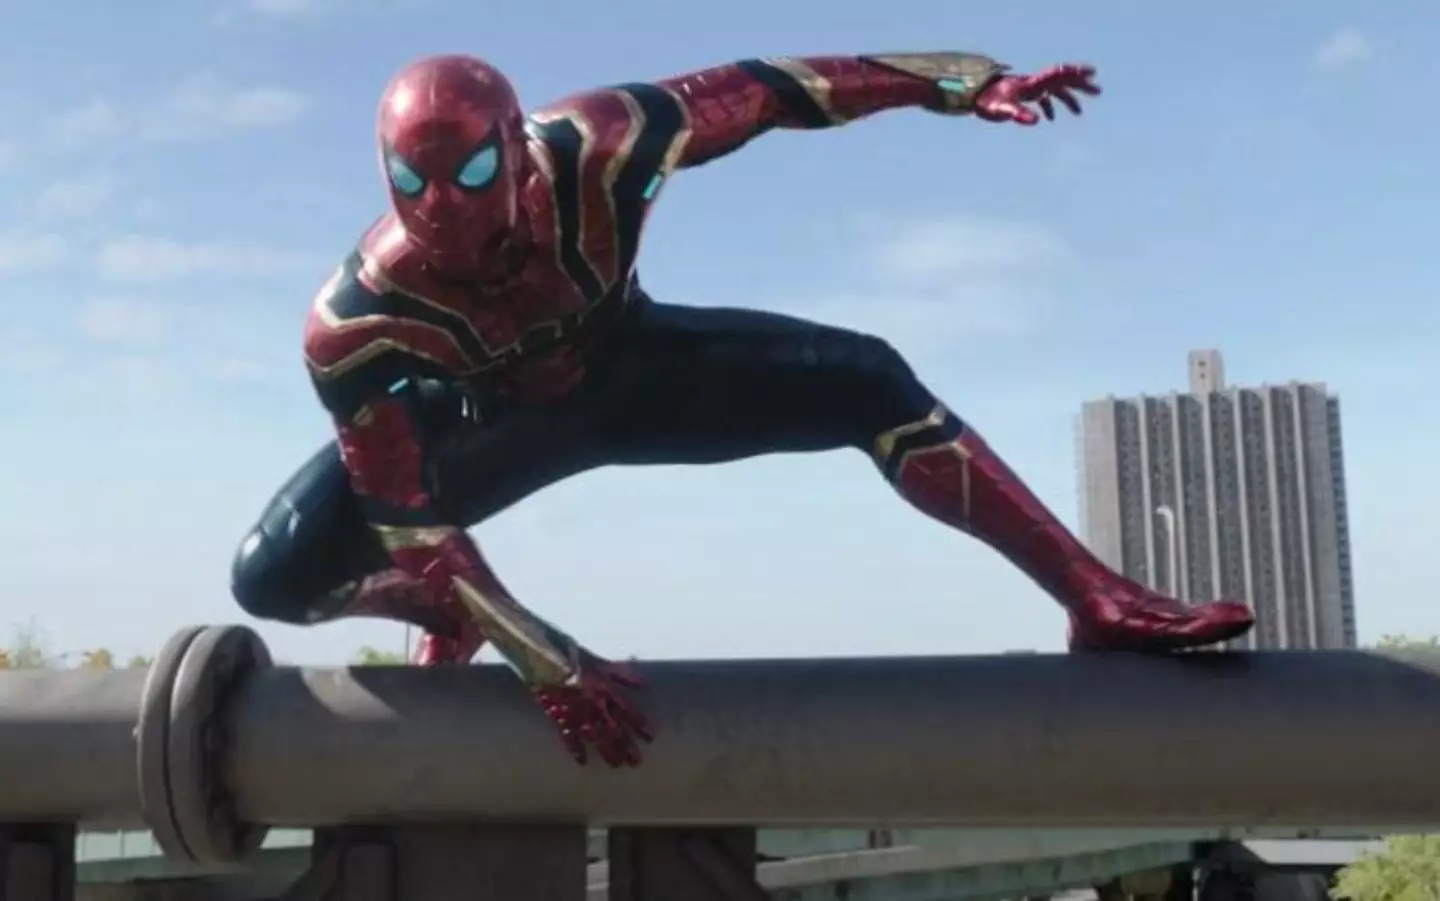 Spider-Man has faced a number of villains throughout the comics and films.